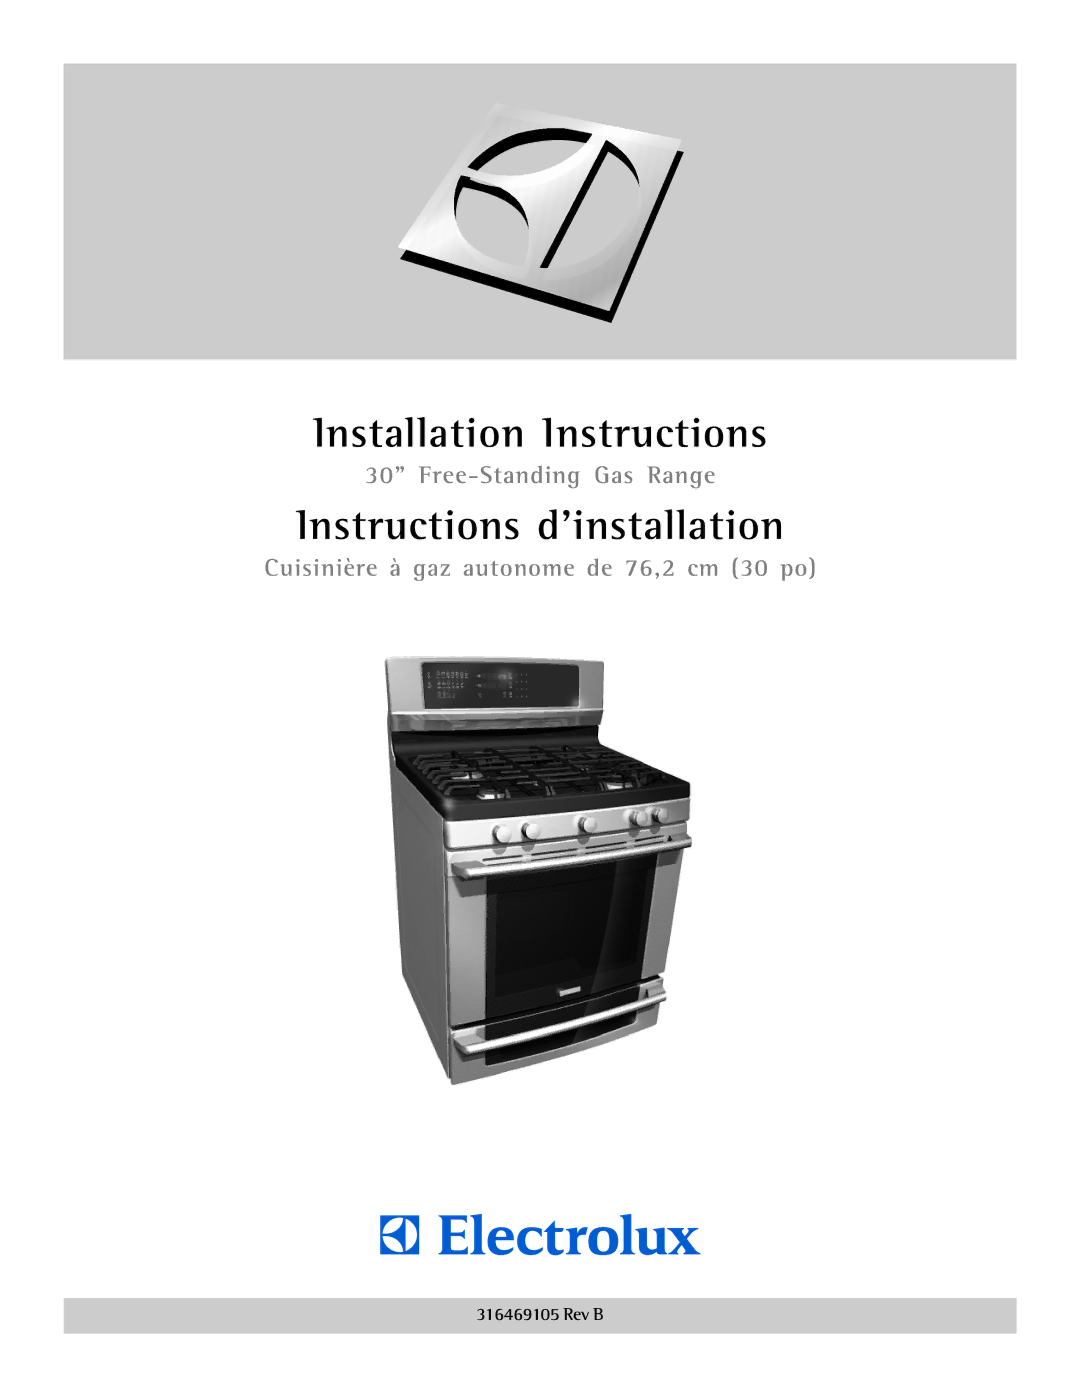 Electrolux 316469105 installation instructions Installation Instructions 